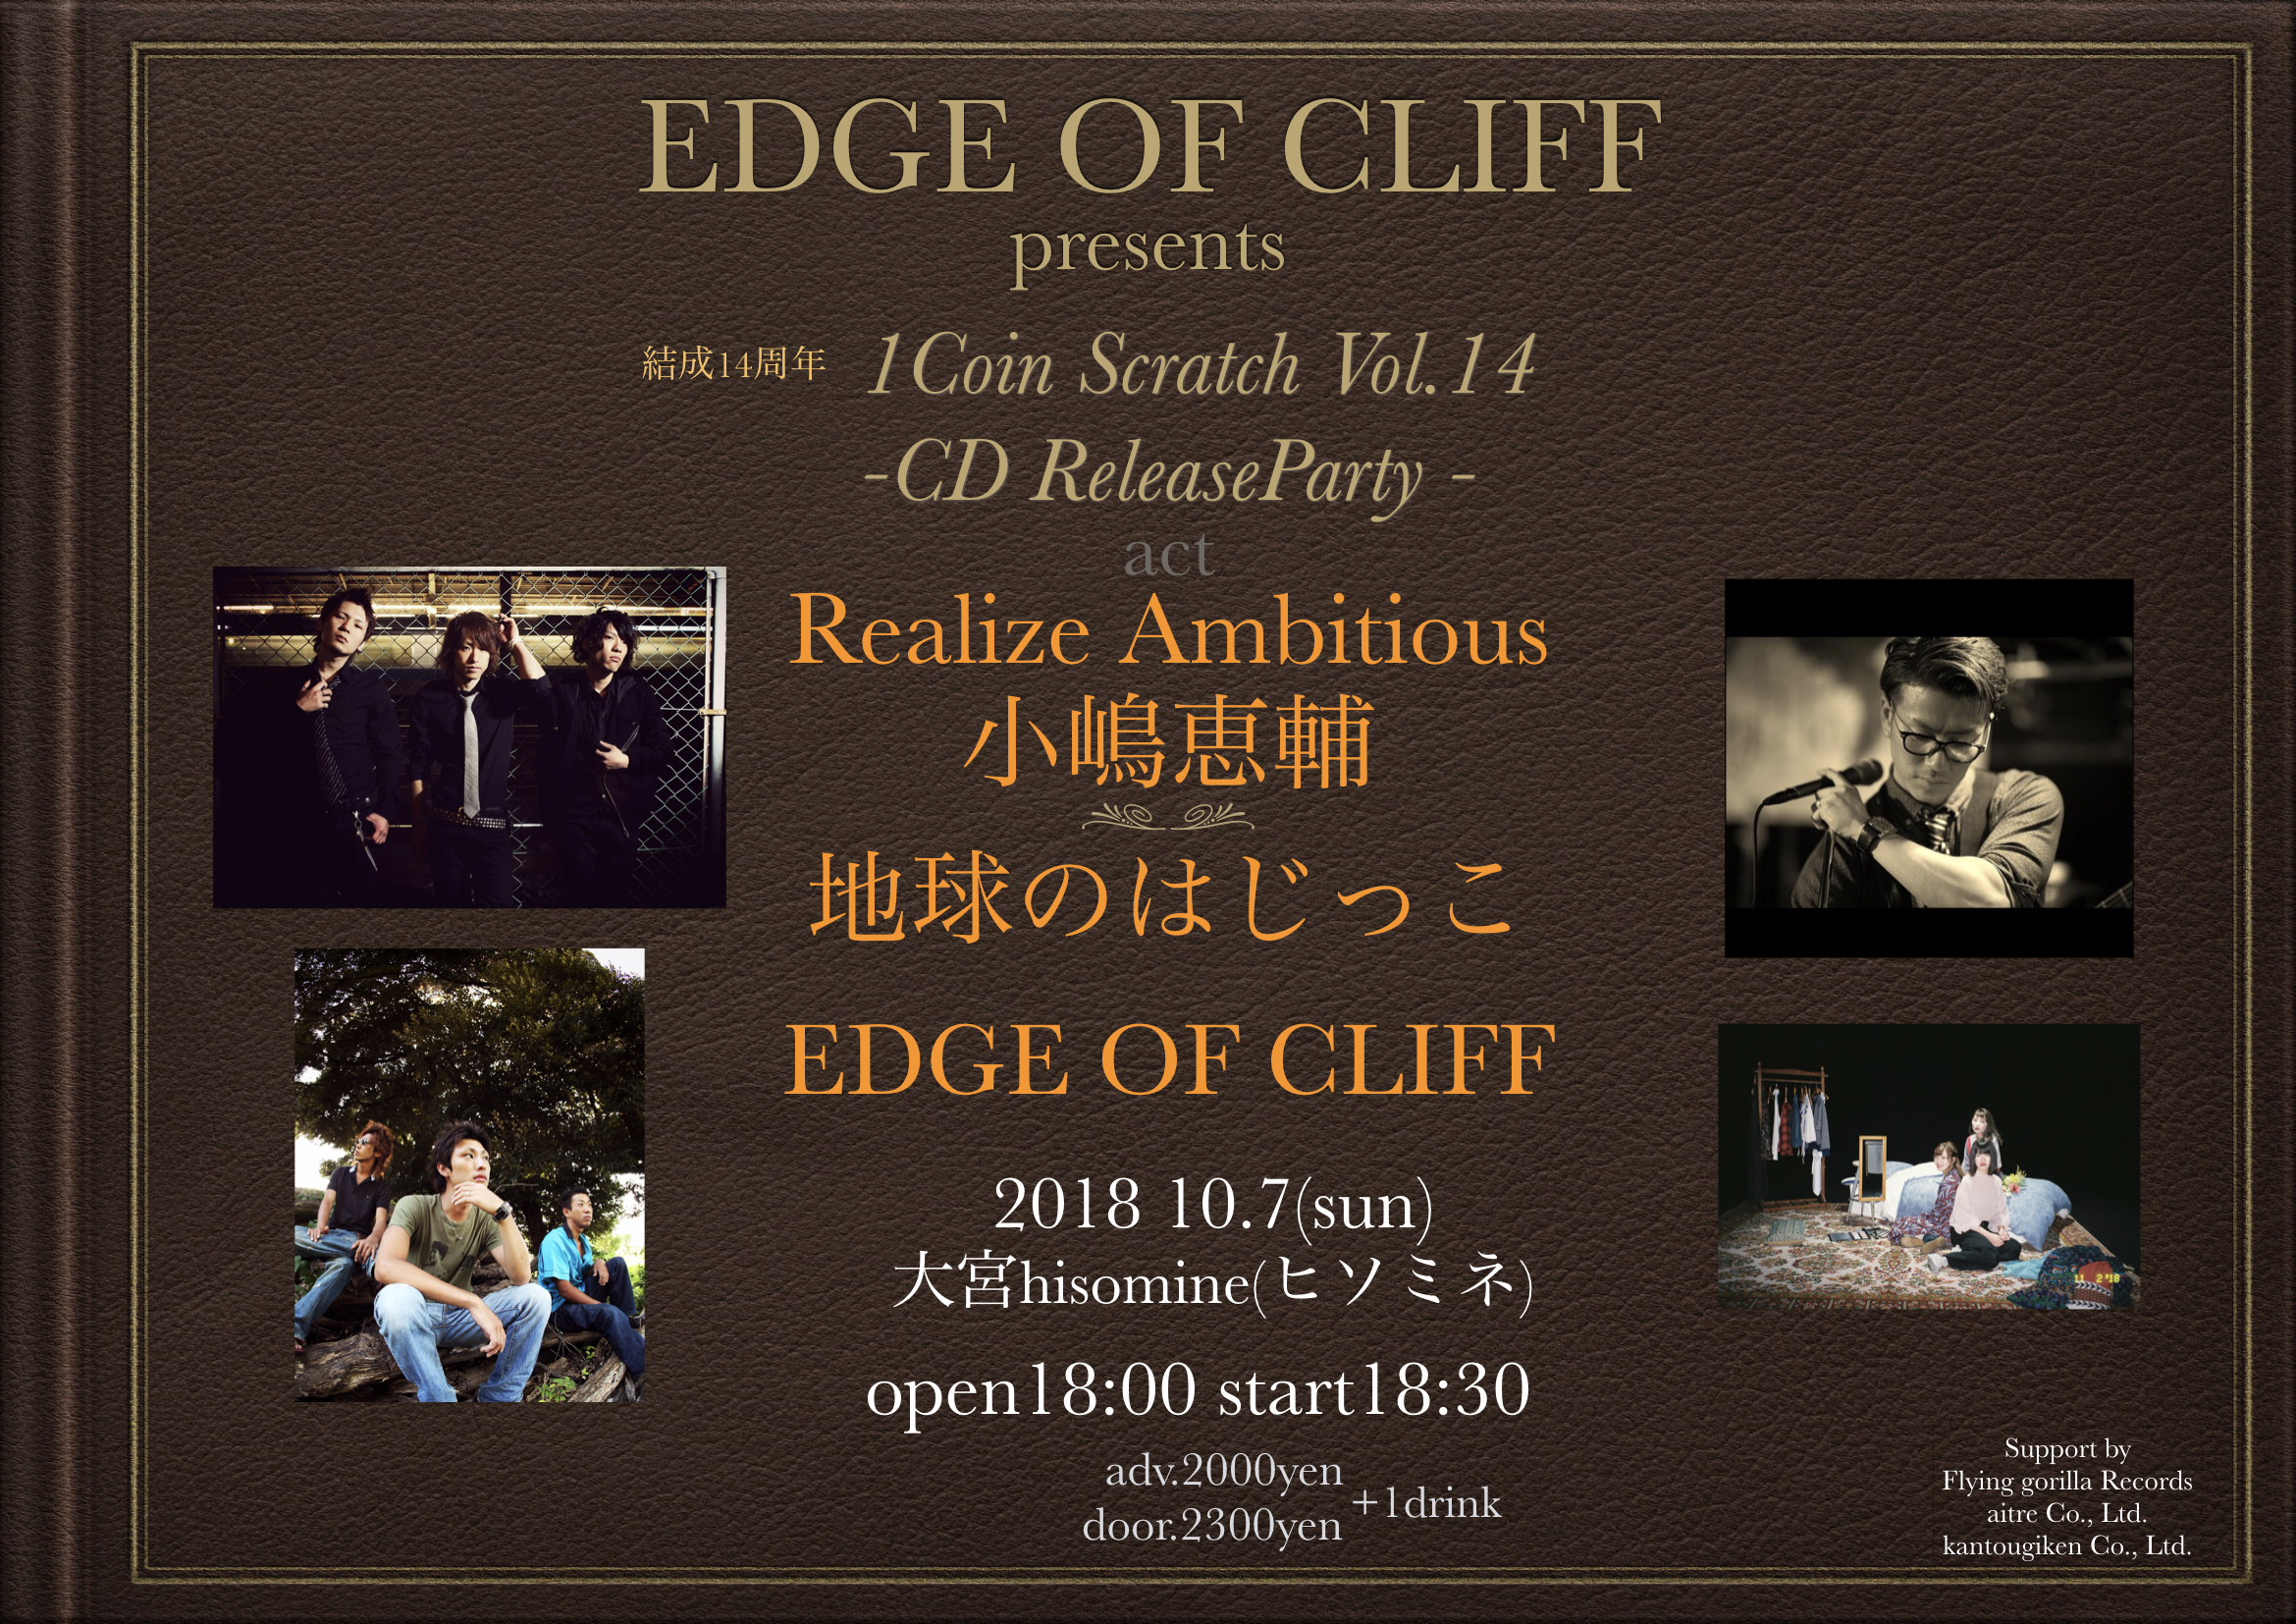 EDGE OF CLIFF presents 1Coin Scratch Vol.14